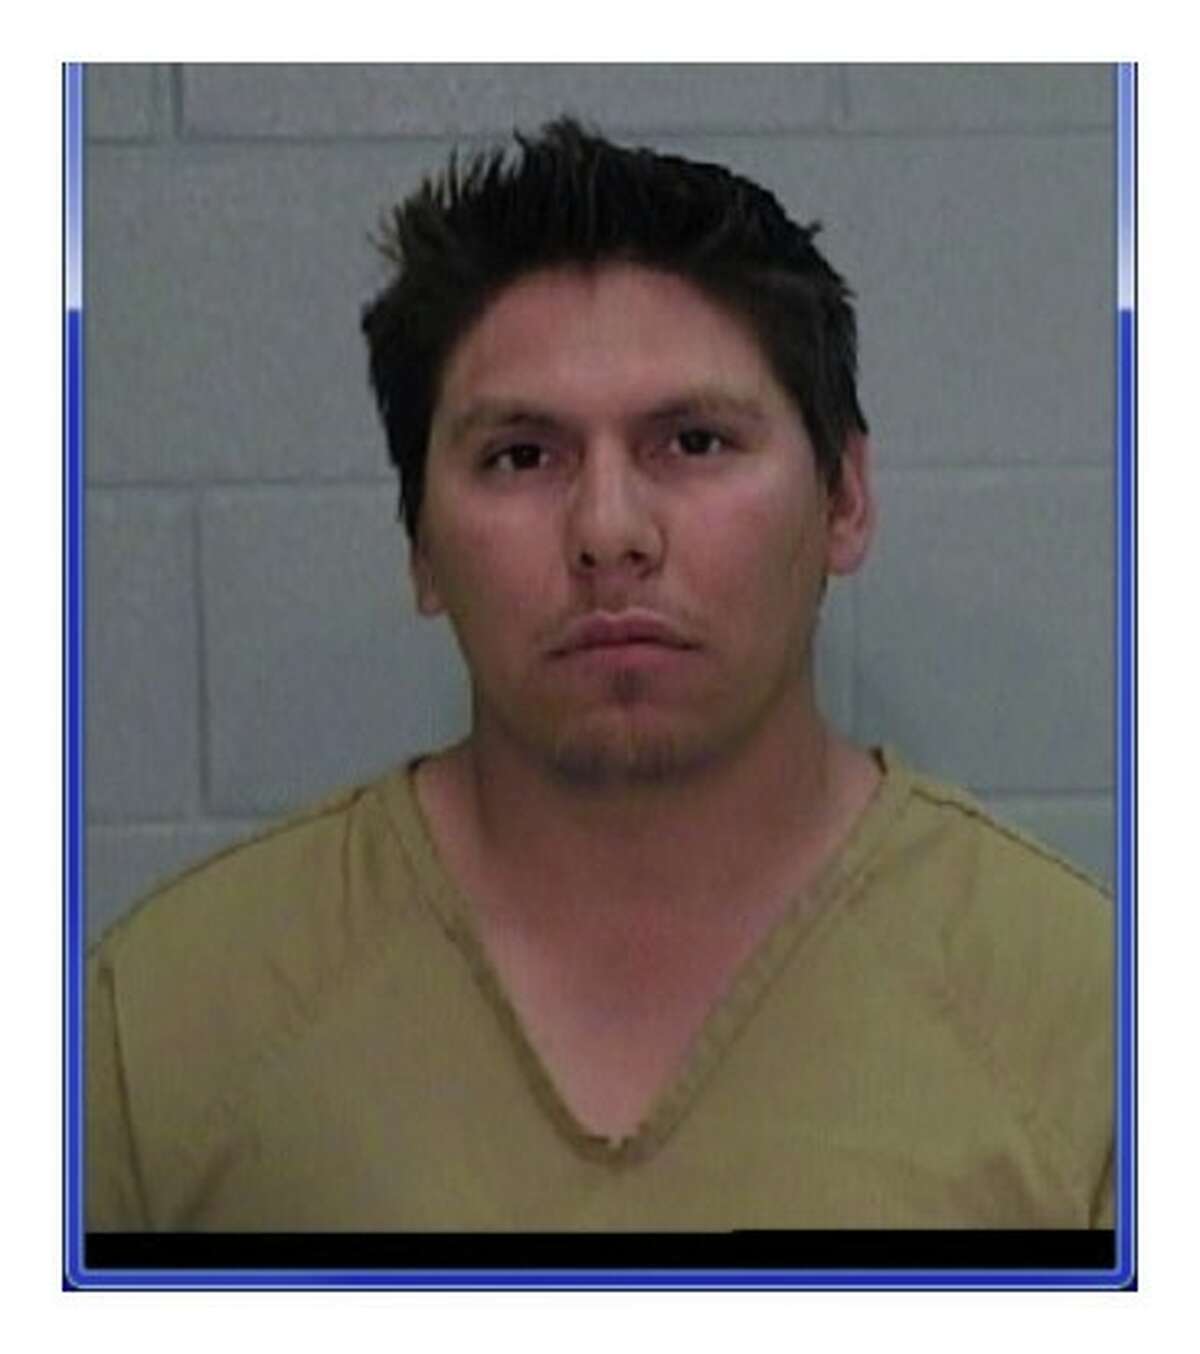 Manuel Chico, a 25-year-old Odessa man, allegedly tried to speed his way through a Whataburger drive-thru by impersonating a police officer, according to Odessa police. An officer in uniform spotted Chico and tailed him back to his apartment in his personal vehicle where he was arrested, according to the Odessa American. Chico has been charged with impersonating a public servant and could face up to 10 years in prison if convicted. (Photo courtesy of Local Big 2 News)